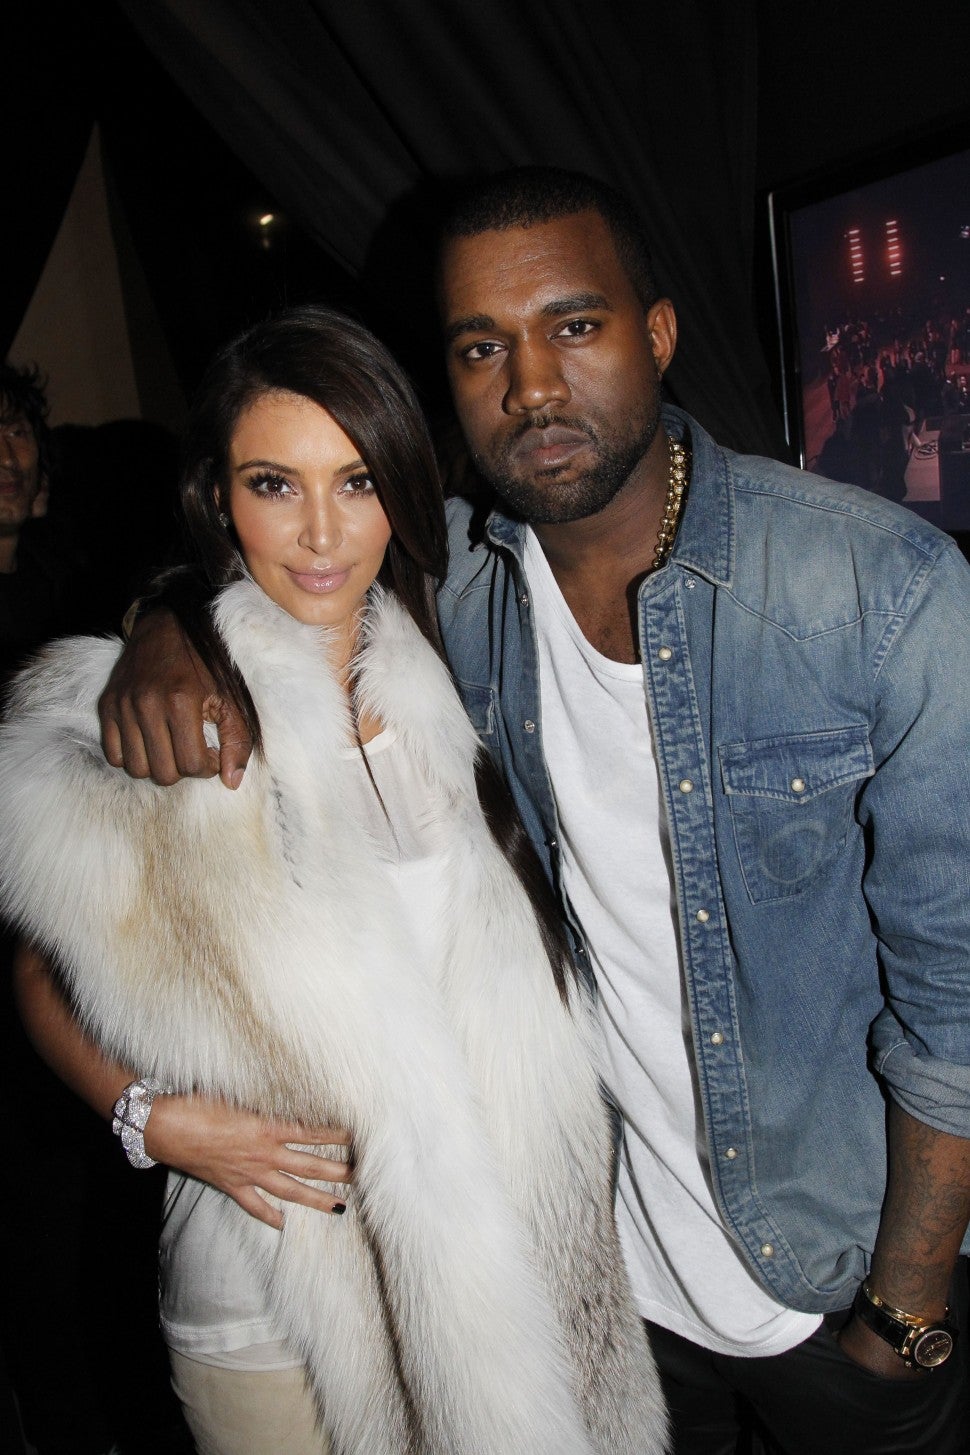 Kim Kardashian and Kanye West attend the Kanye West Ready-To-Wear Fall/Winter 2012 show as part of Paris Fashion Week at Halle Freyssinet on March 6, 2012 in Paris, France.